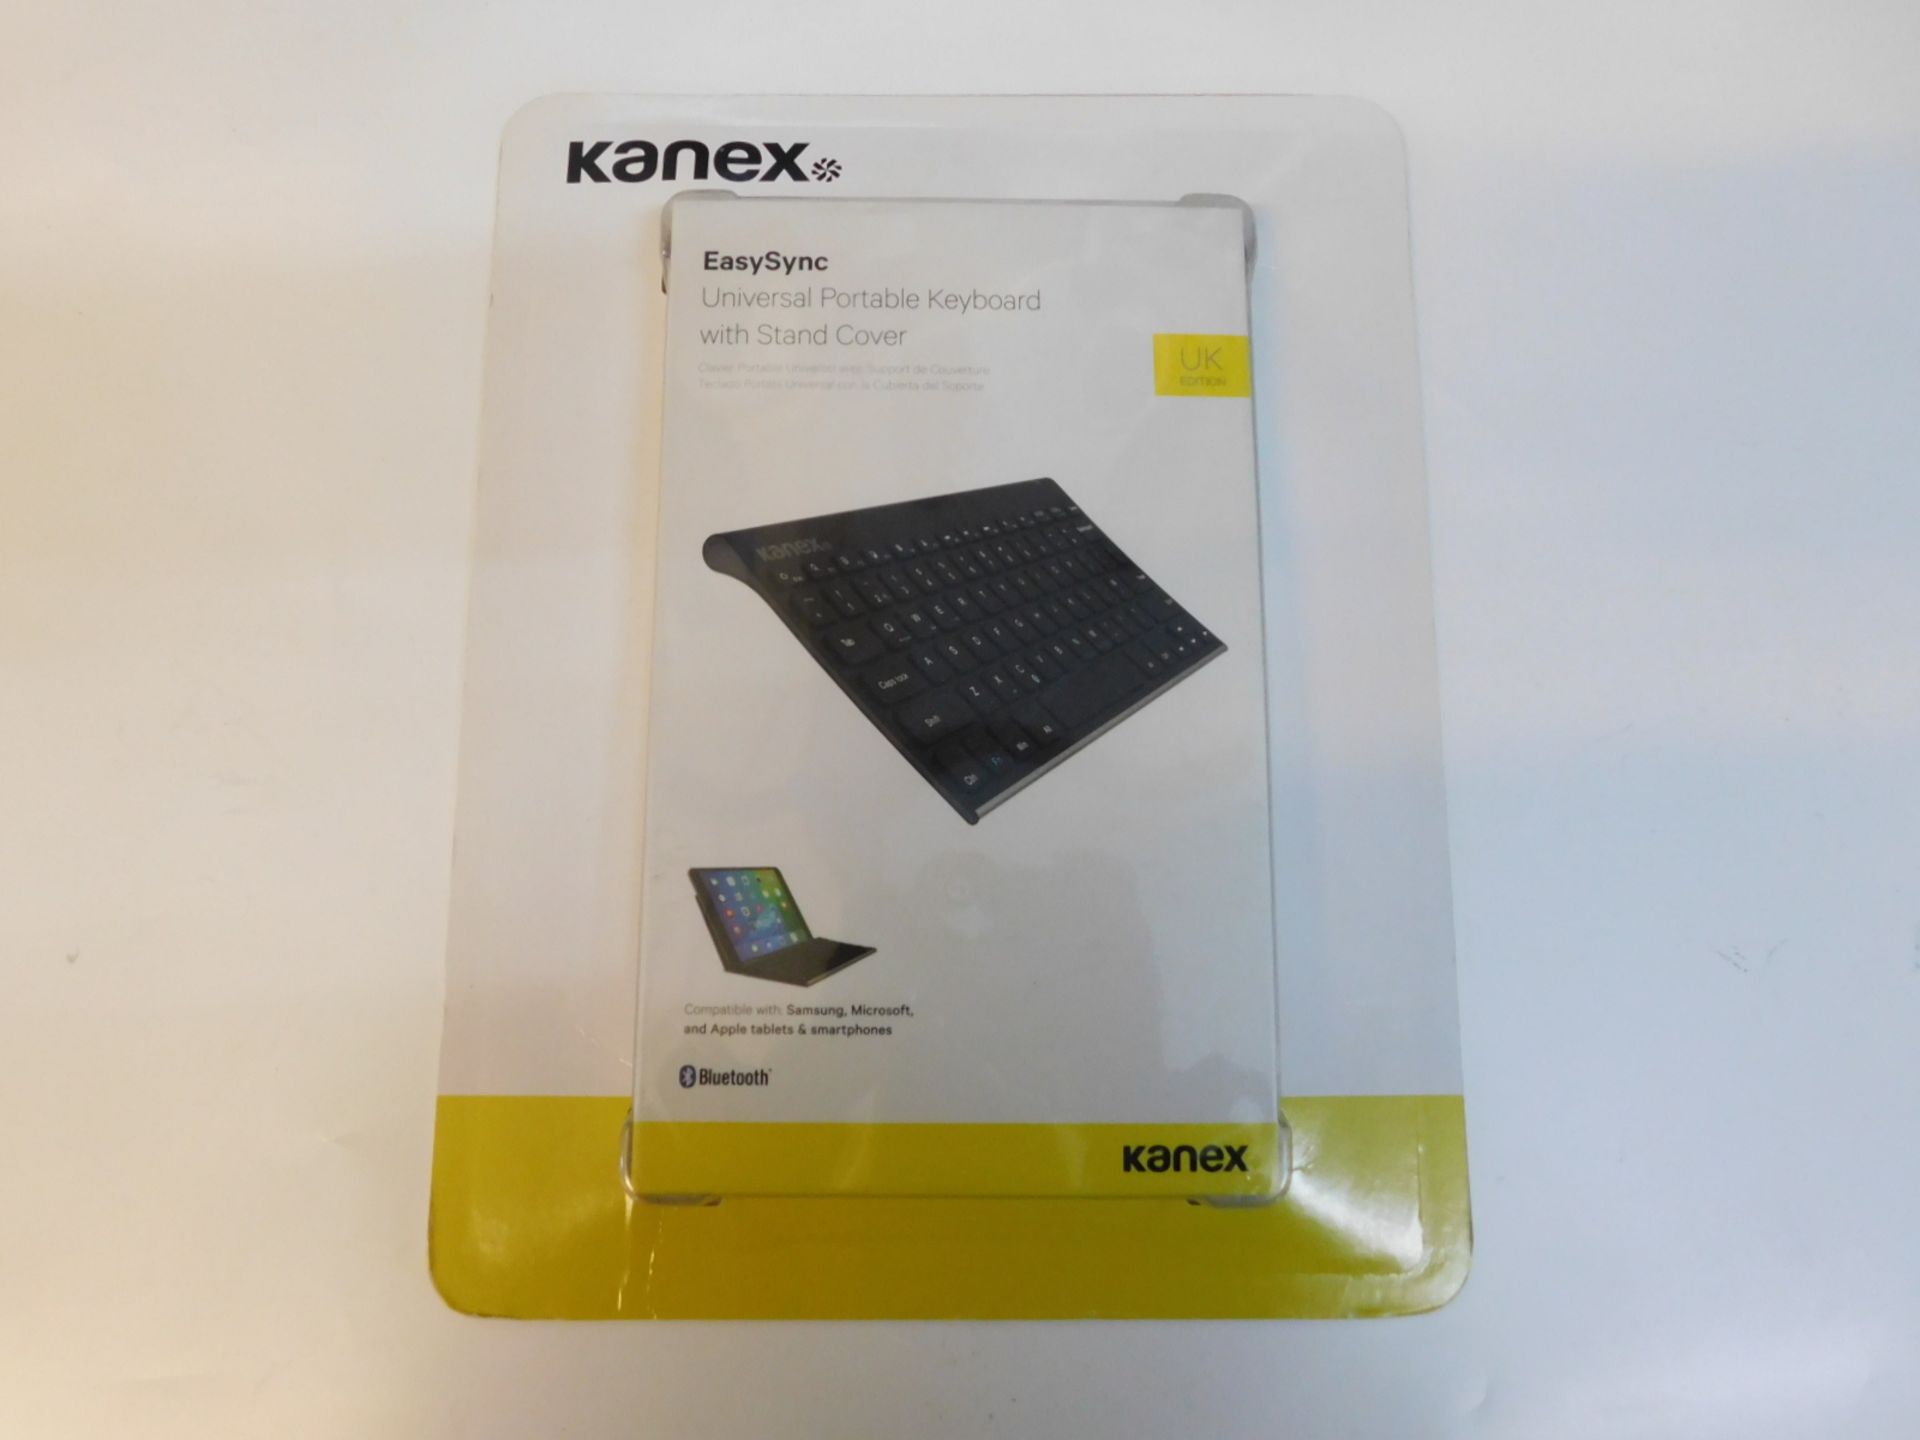 1 BRAND NEW PACK OF KANEX EASY SYNC UNIVERSAL PORTABLE KEYBOARD WITH COVER RRP Â£49.99